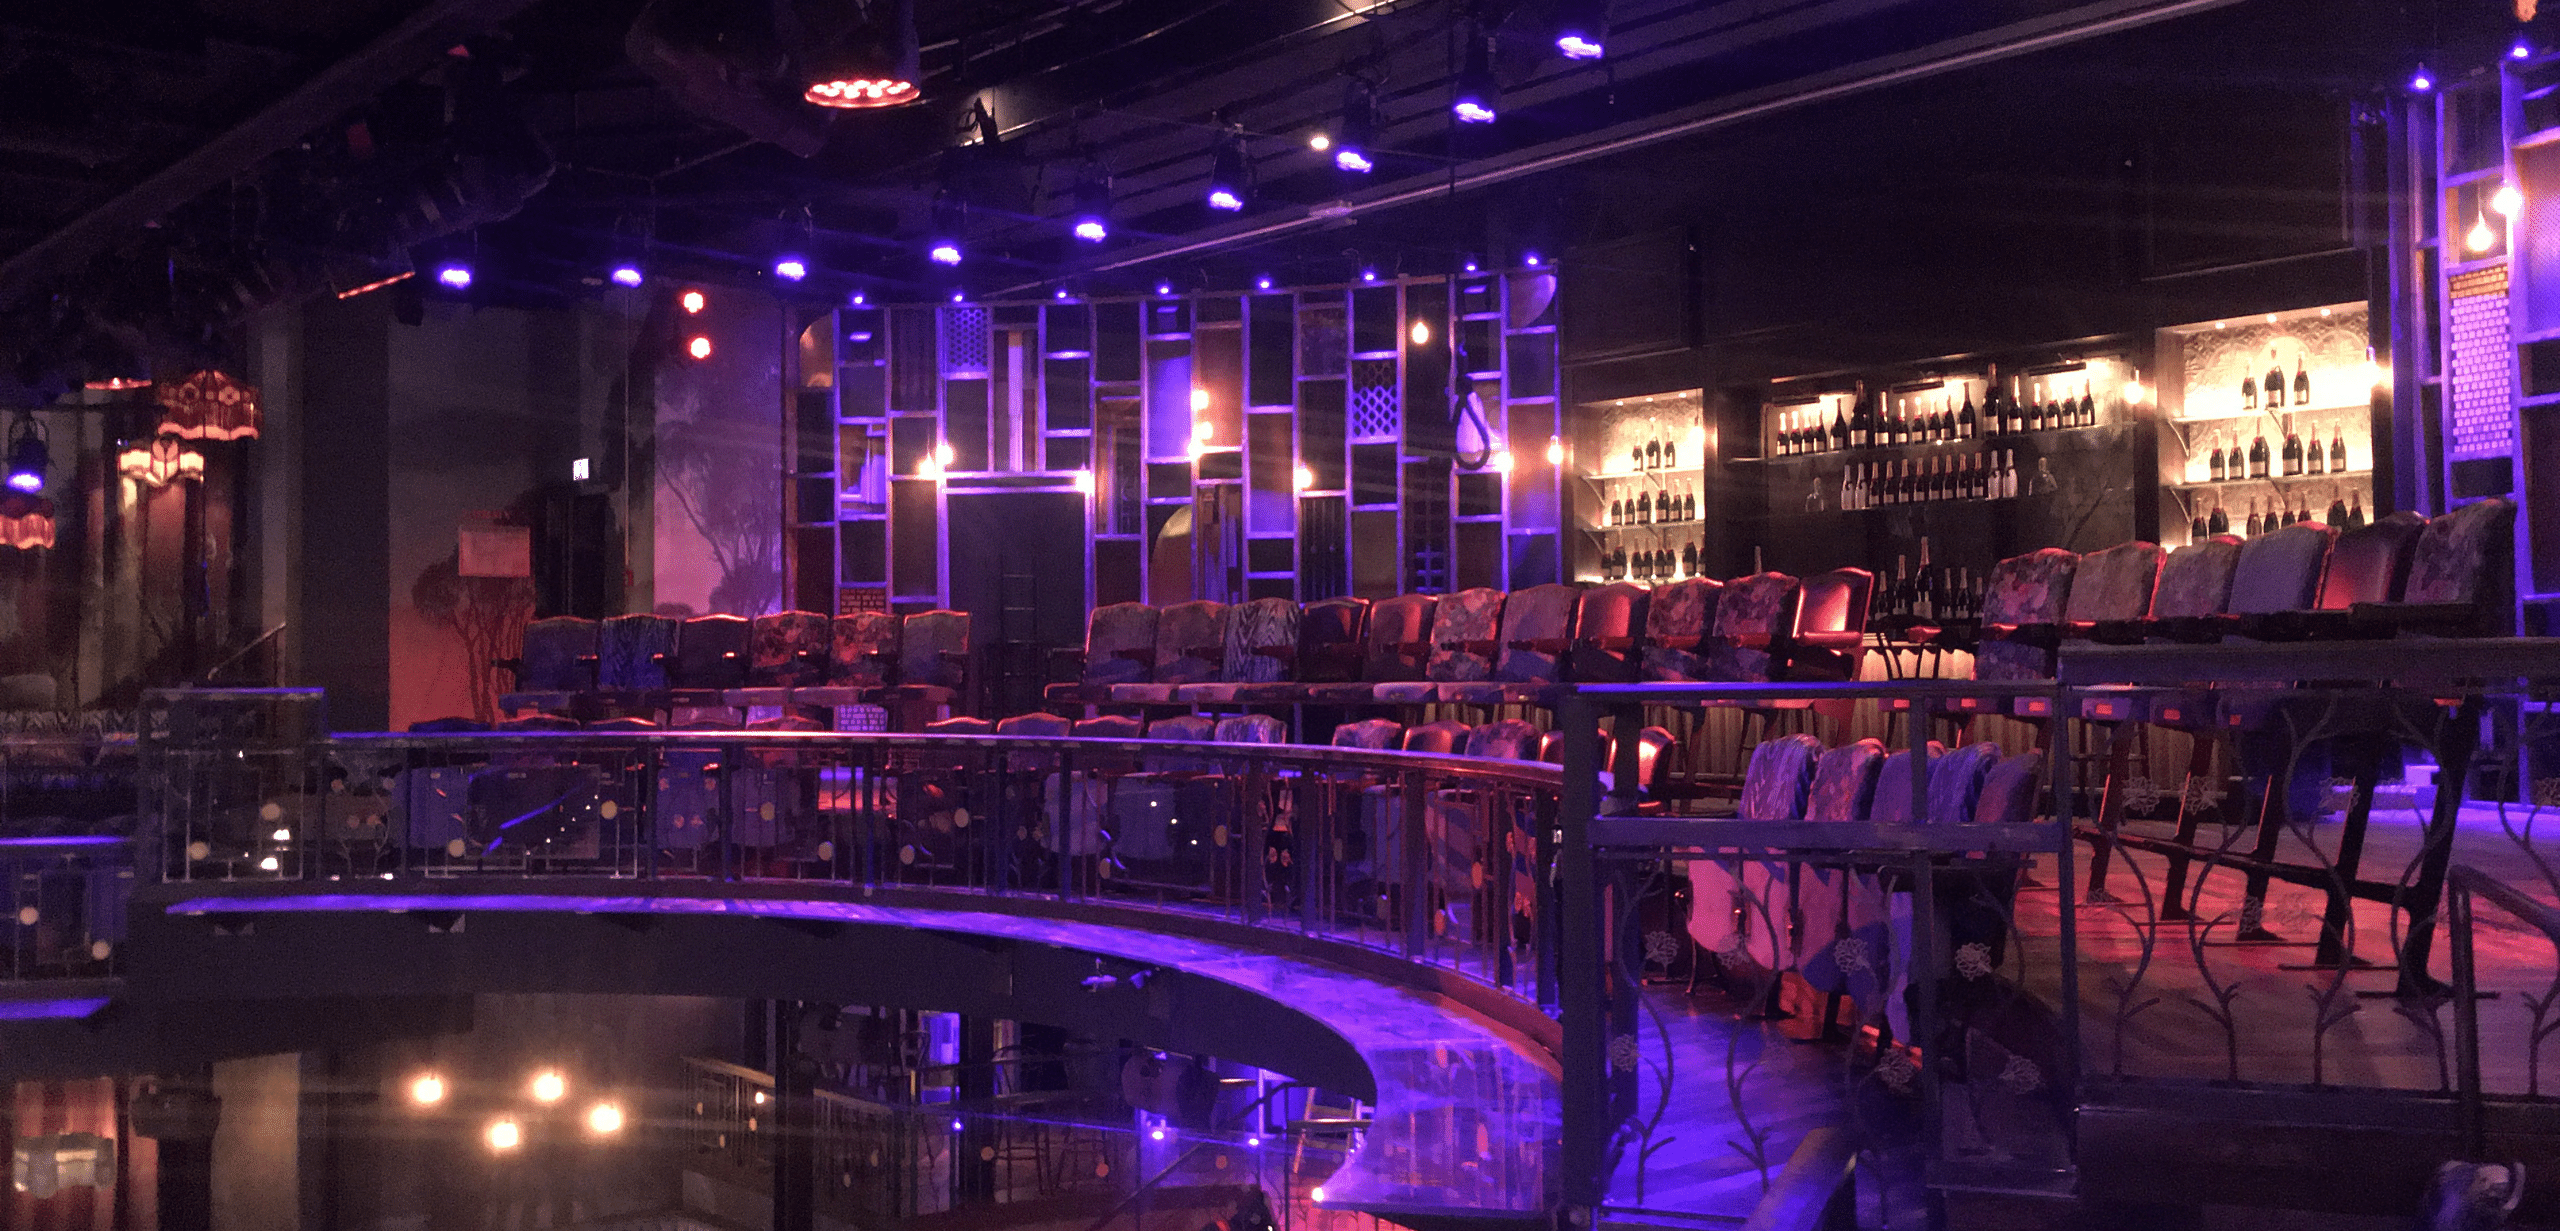 The interior of a bar with purple lighting.